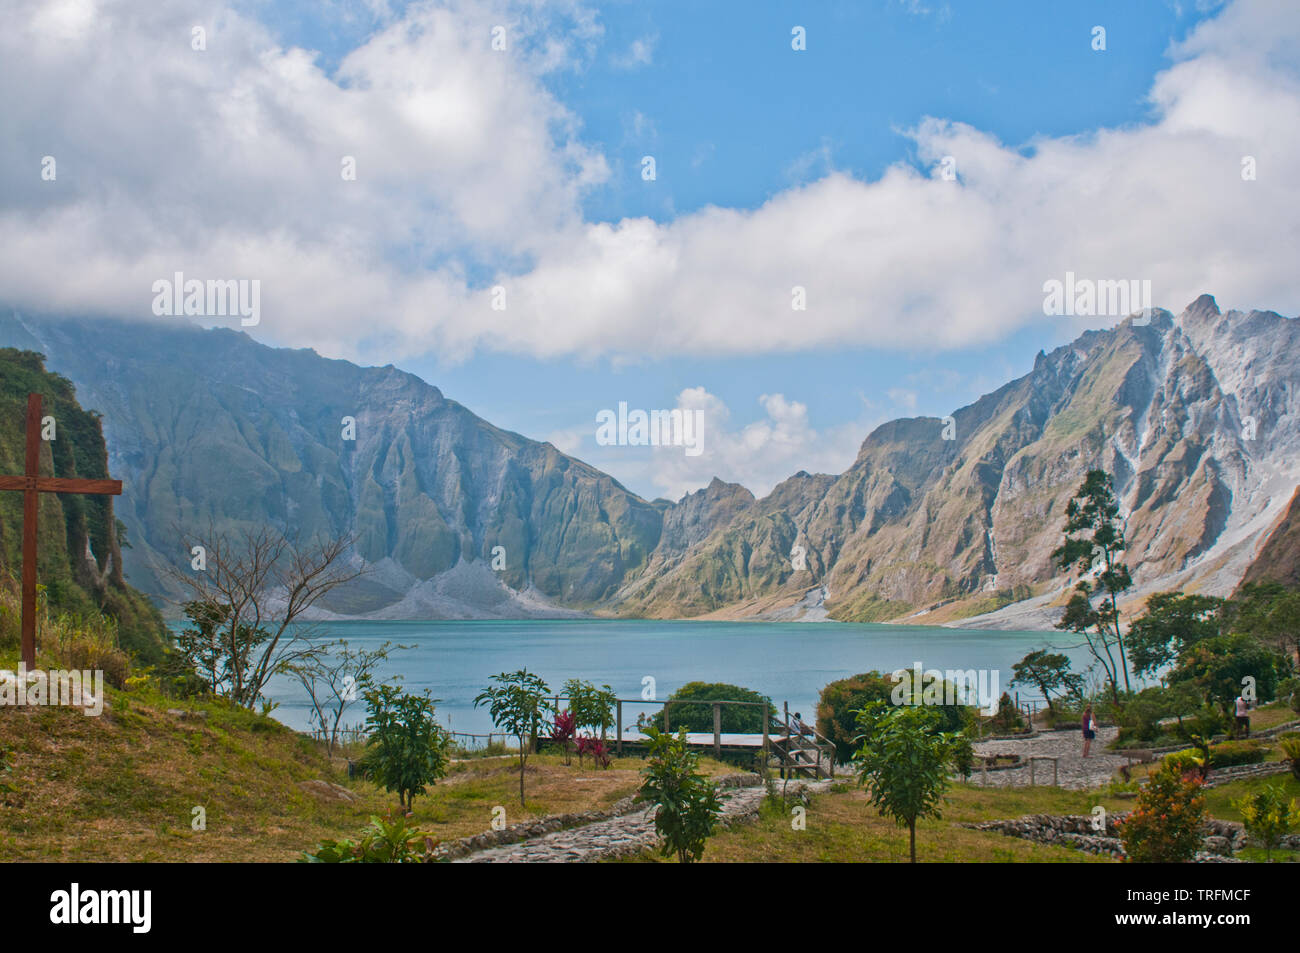 Lake Pinatubo, the deepest lake in the Philippines was created after Mt. Pinatubo erupted and formed a lake from a natural spring and rainfall. Stock Photo